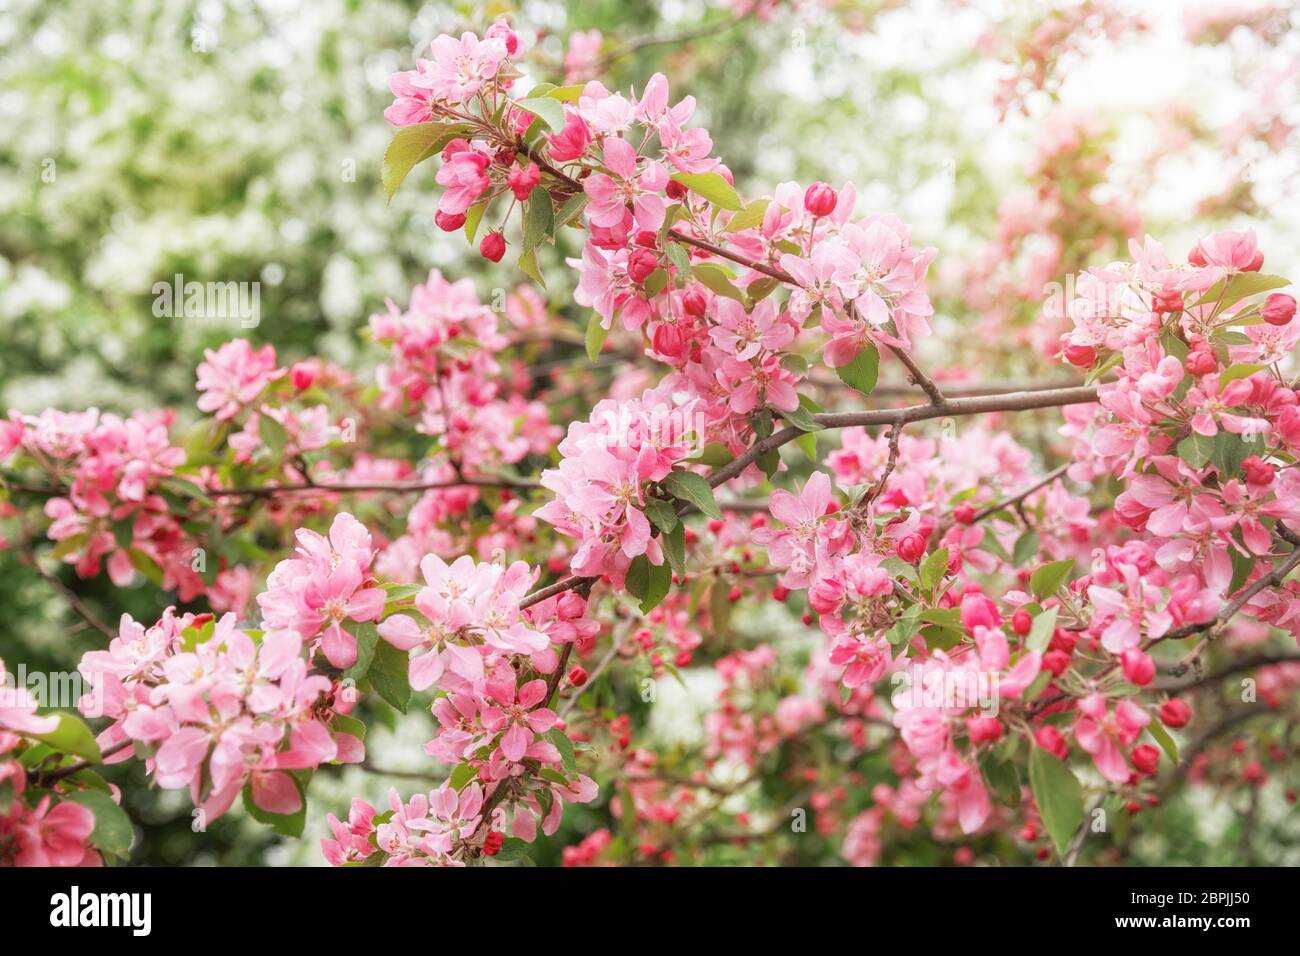 Spring natural background. Blooming decorative apple tree with delicate pink flowers and buds Stock Photo